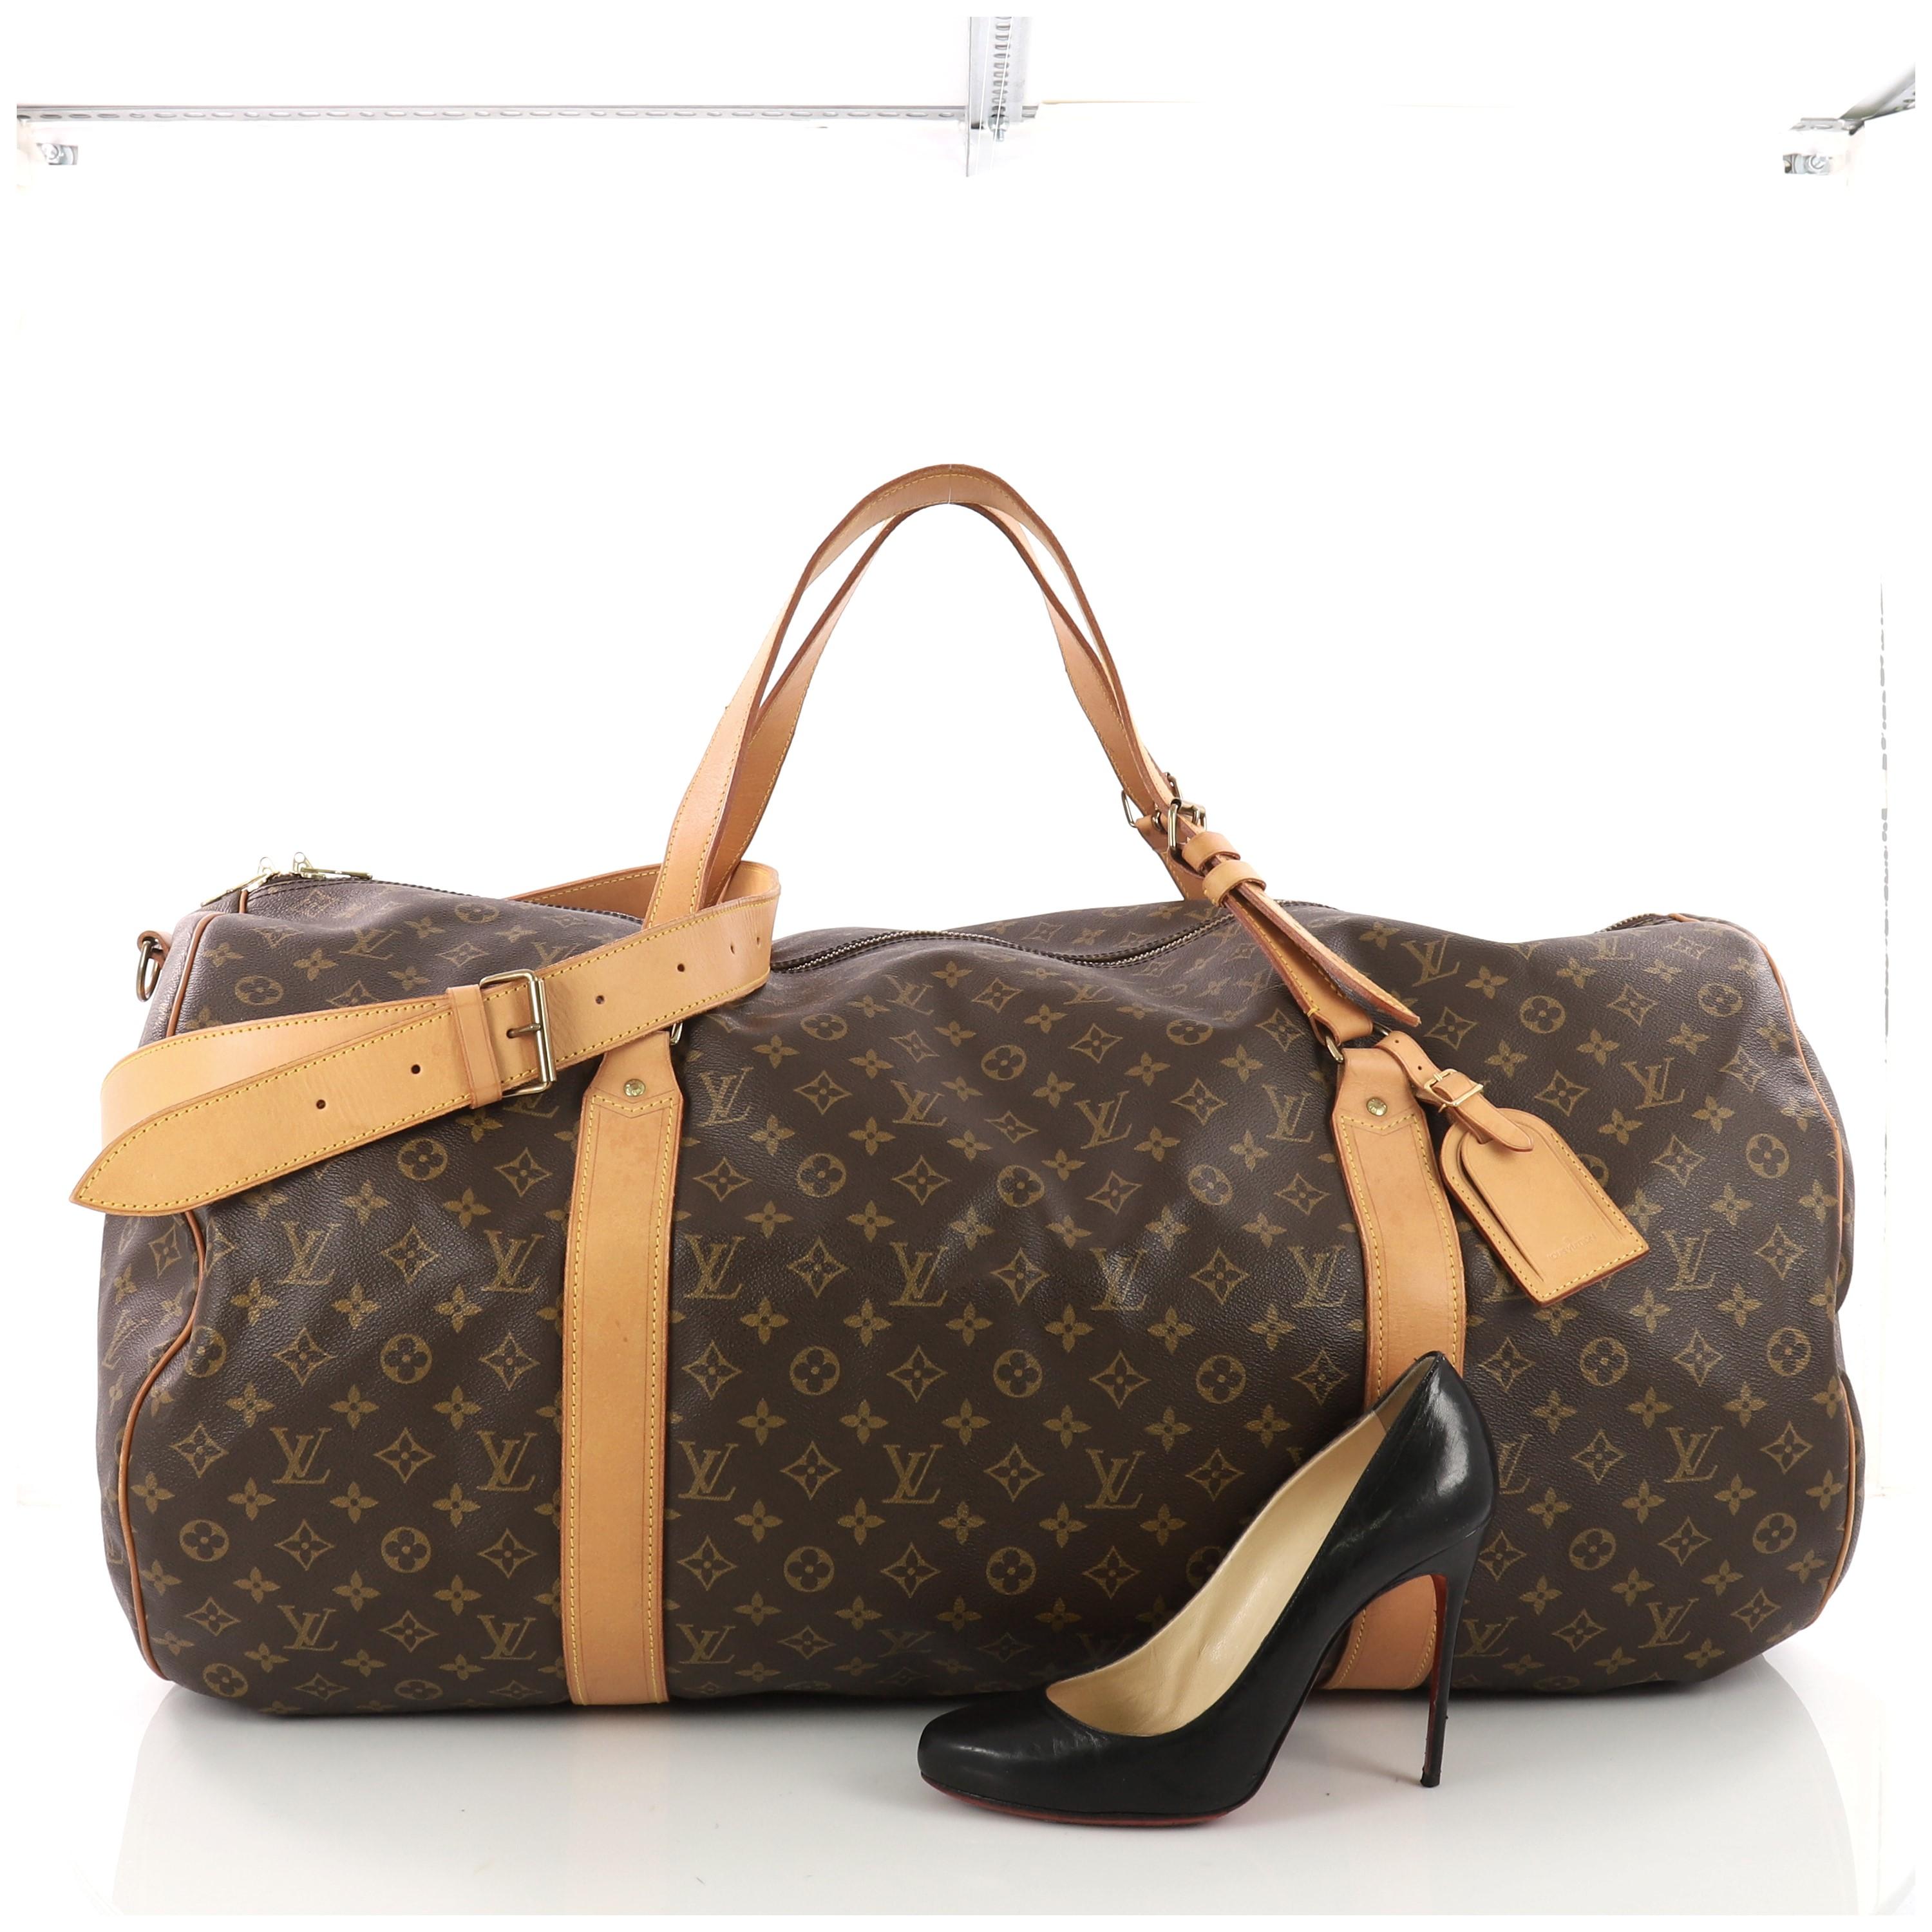 This authentic Louis Vuitton Sac Polochon Handbag Monogram Canvas 65 is the perfect purchase for a weekend trip, and can be effortlessly paired with any outfit from casual to formal. Crafted with traditional Louis Vuitton brown monogram coated